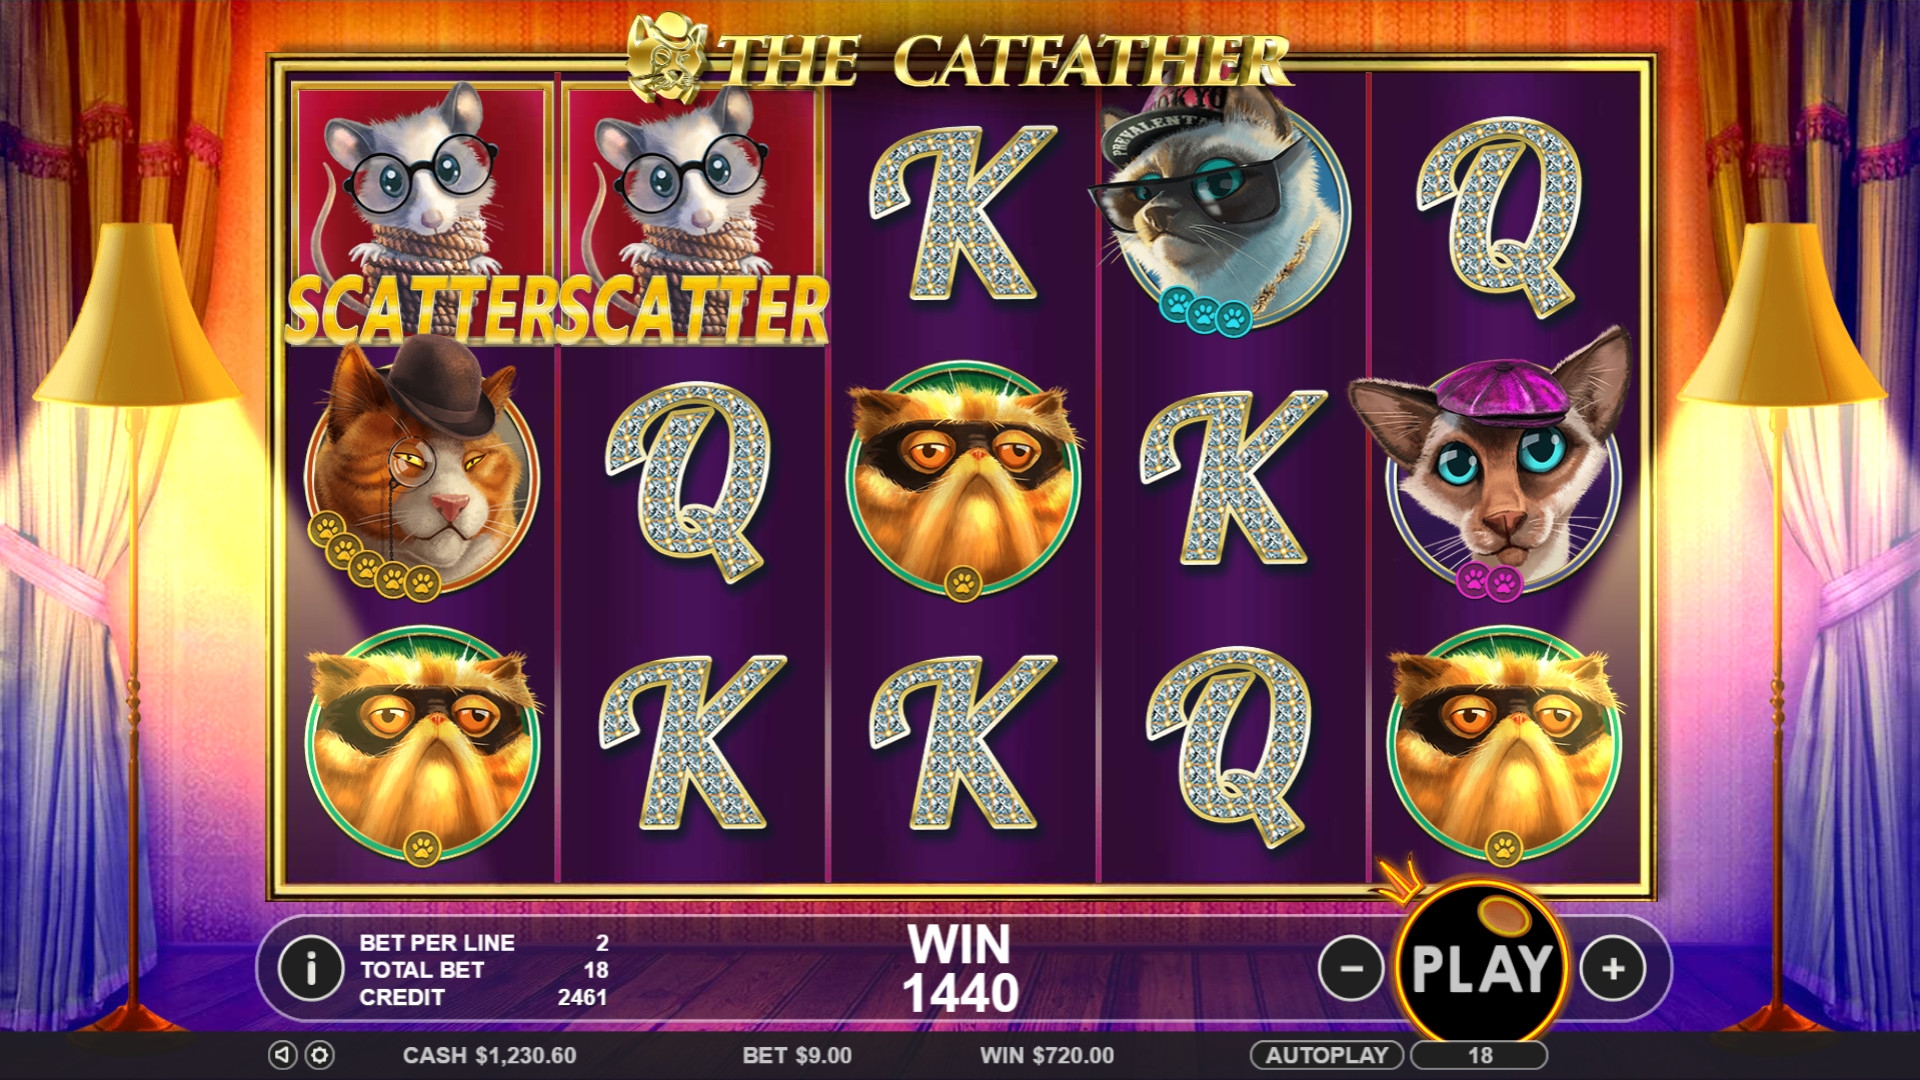 The Catfather (The Catfather) from category Slots